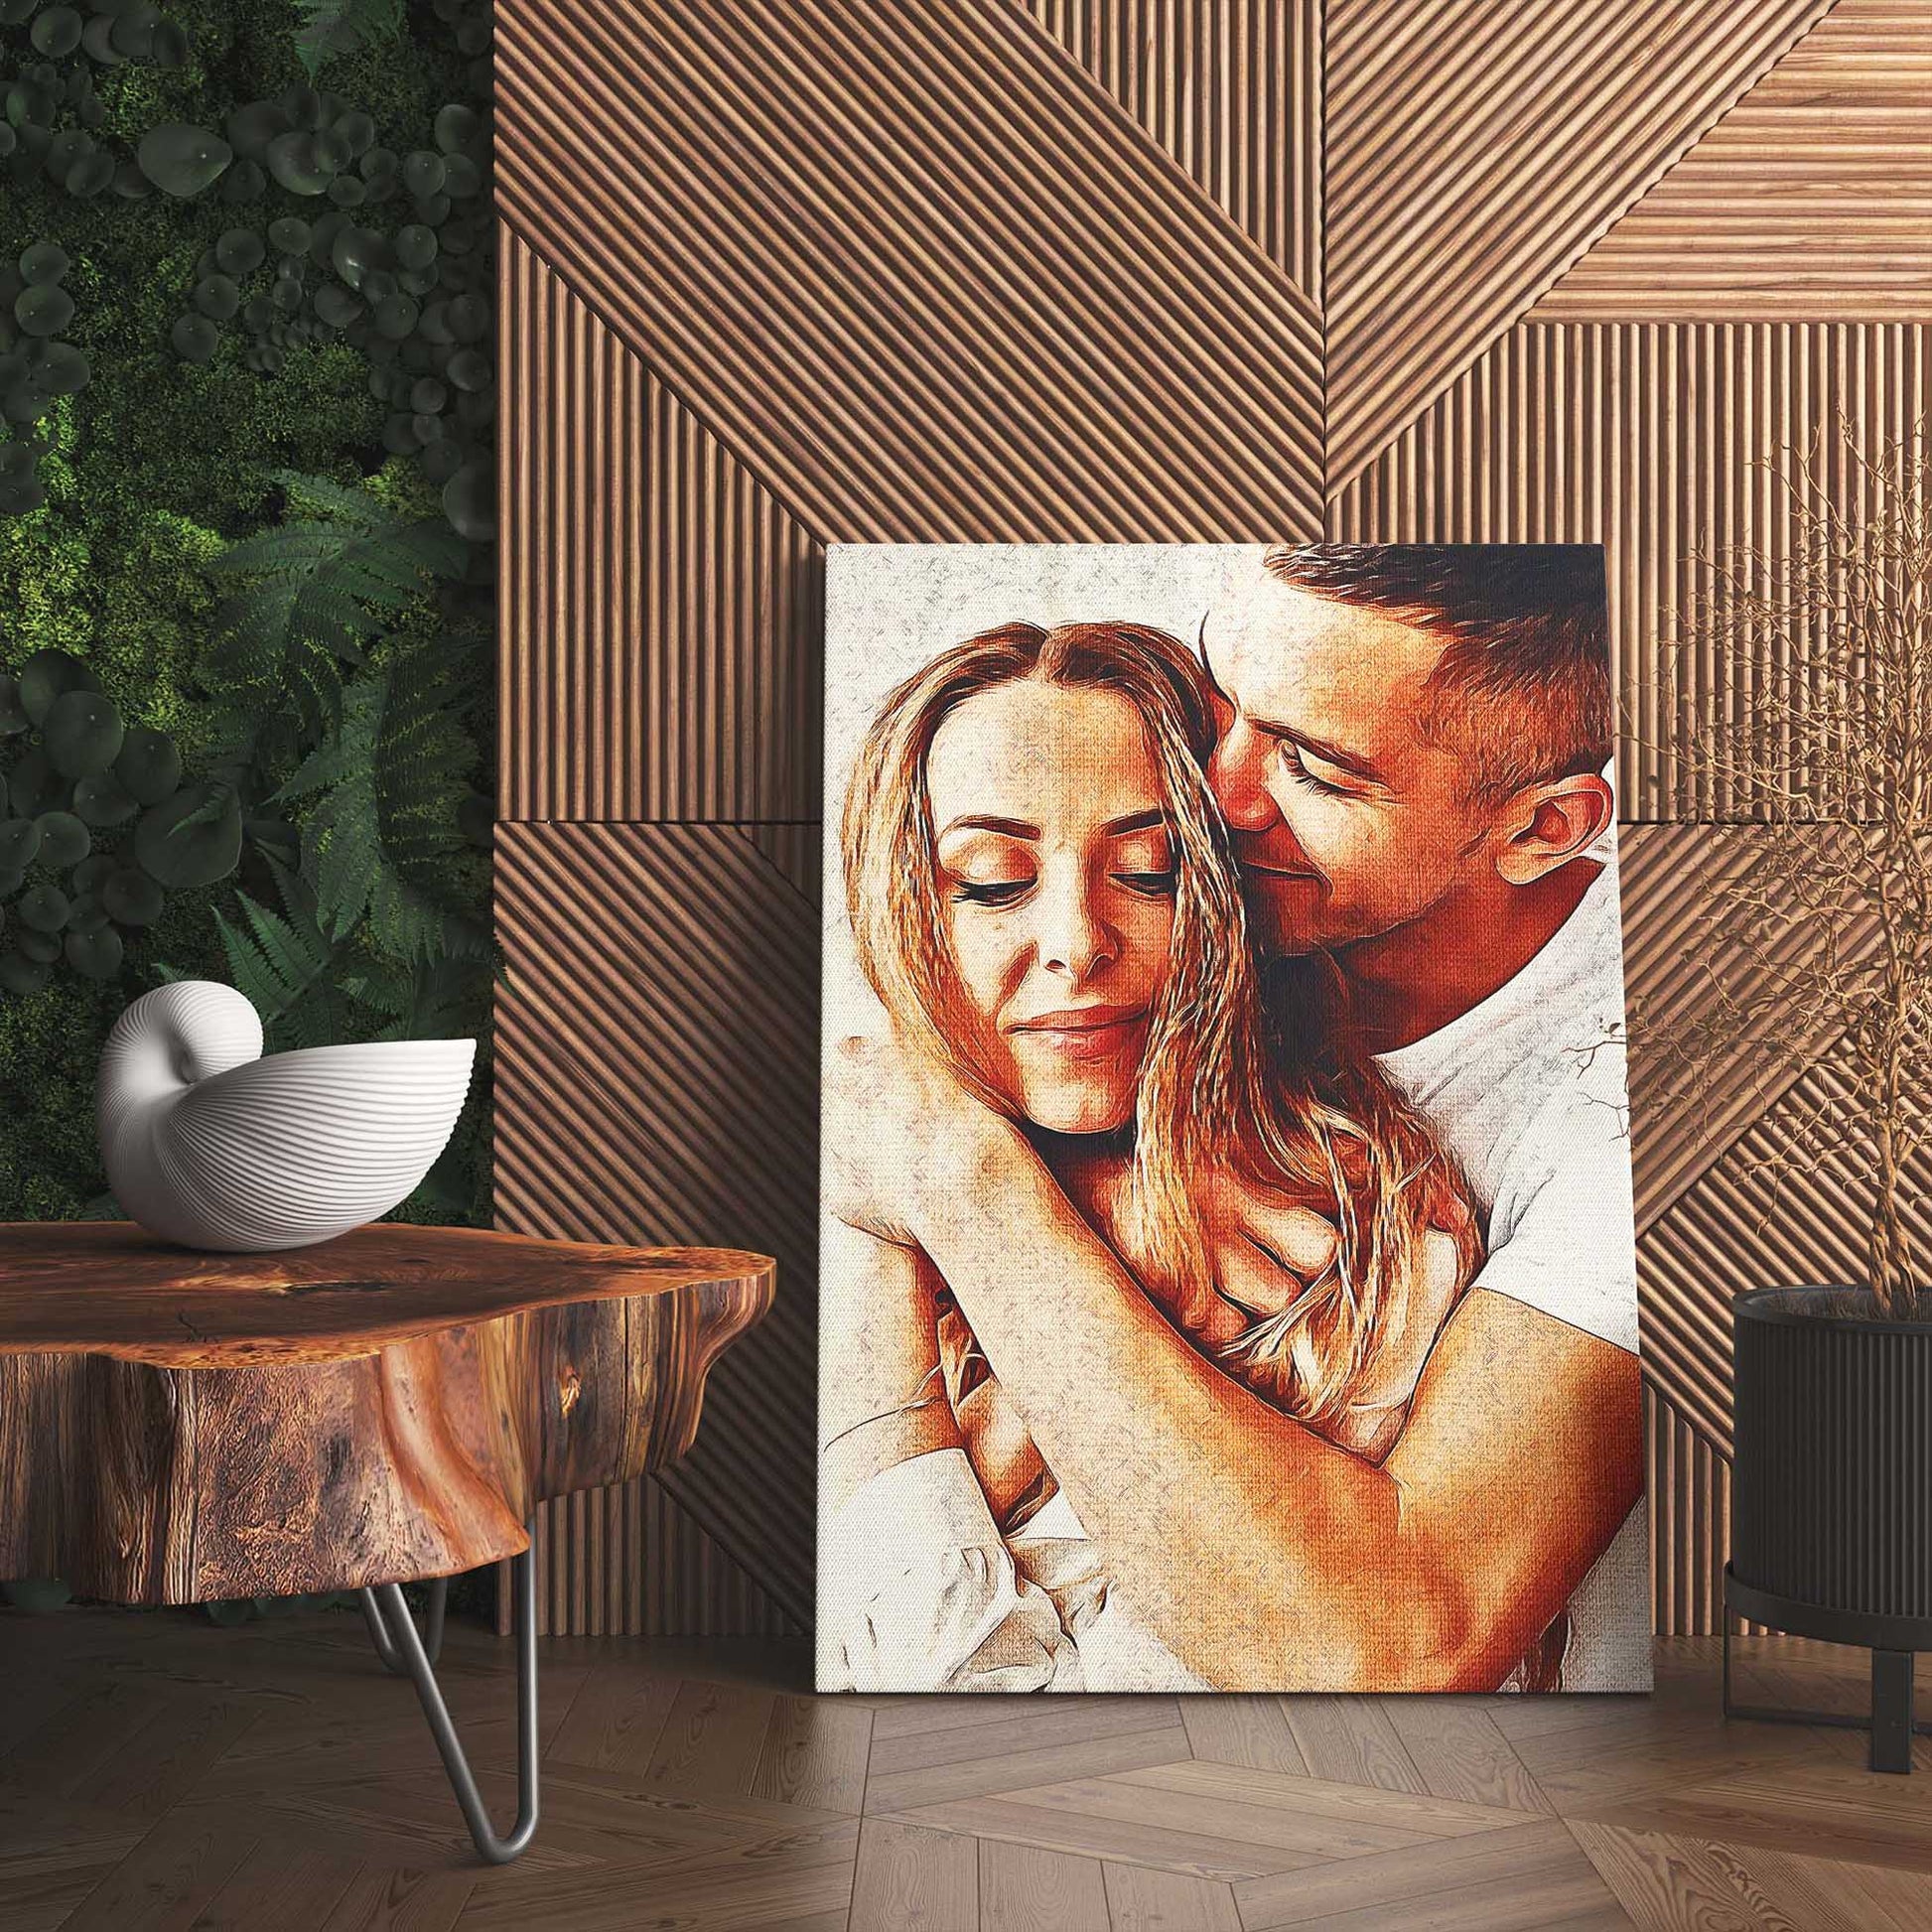 Immerse yourself in the world of art with our Personalised Artistic Oil Painting Canvas